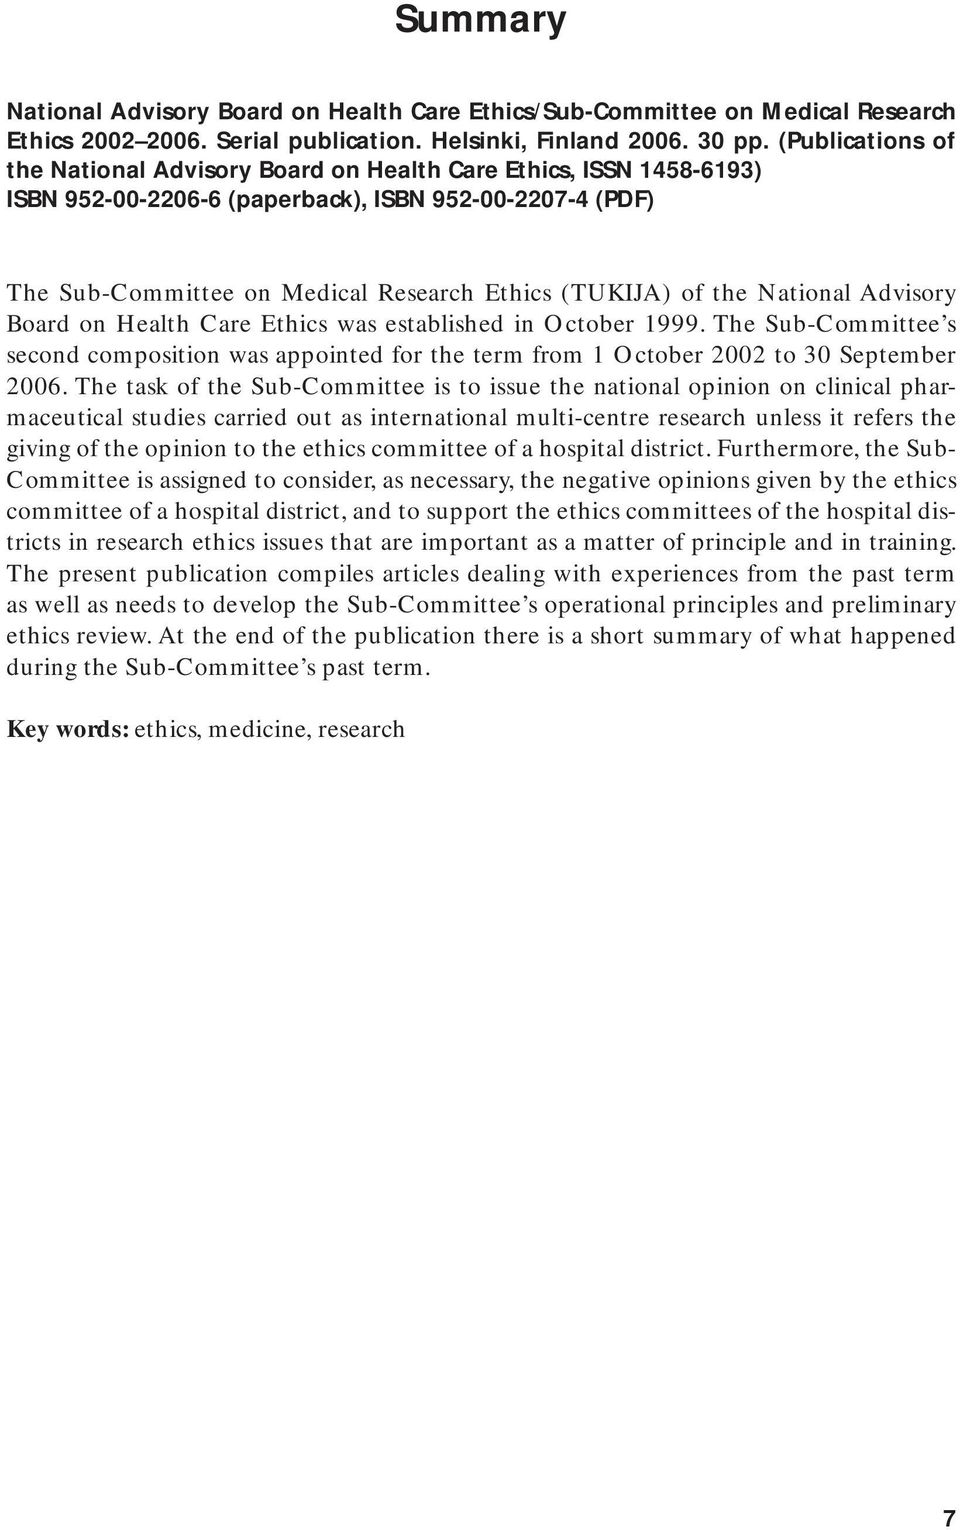 the National Advisory Board on Health Care Ethics was established in October 1999. The Sub-Committee s second composition was appointed for the term from 1 October 2002 to 30 September 2006.